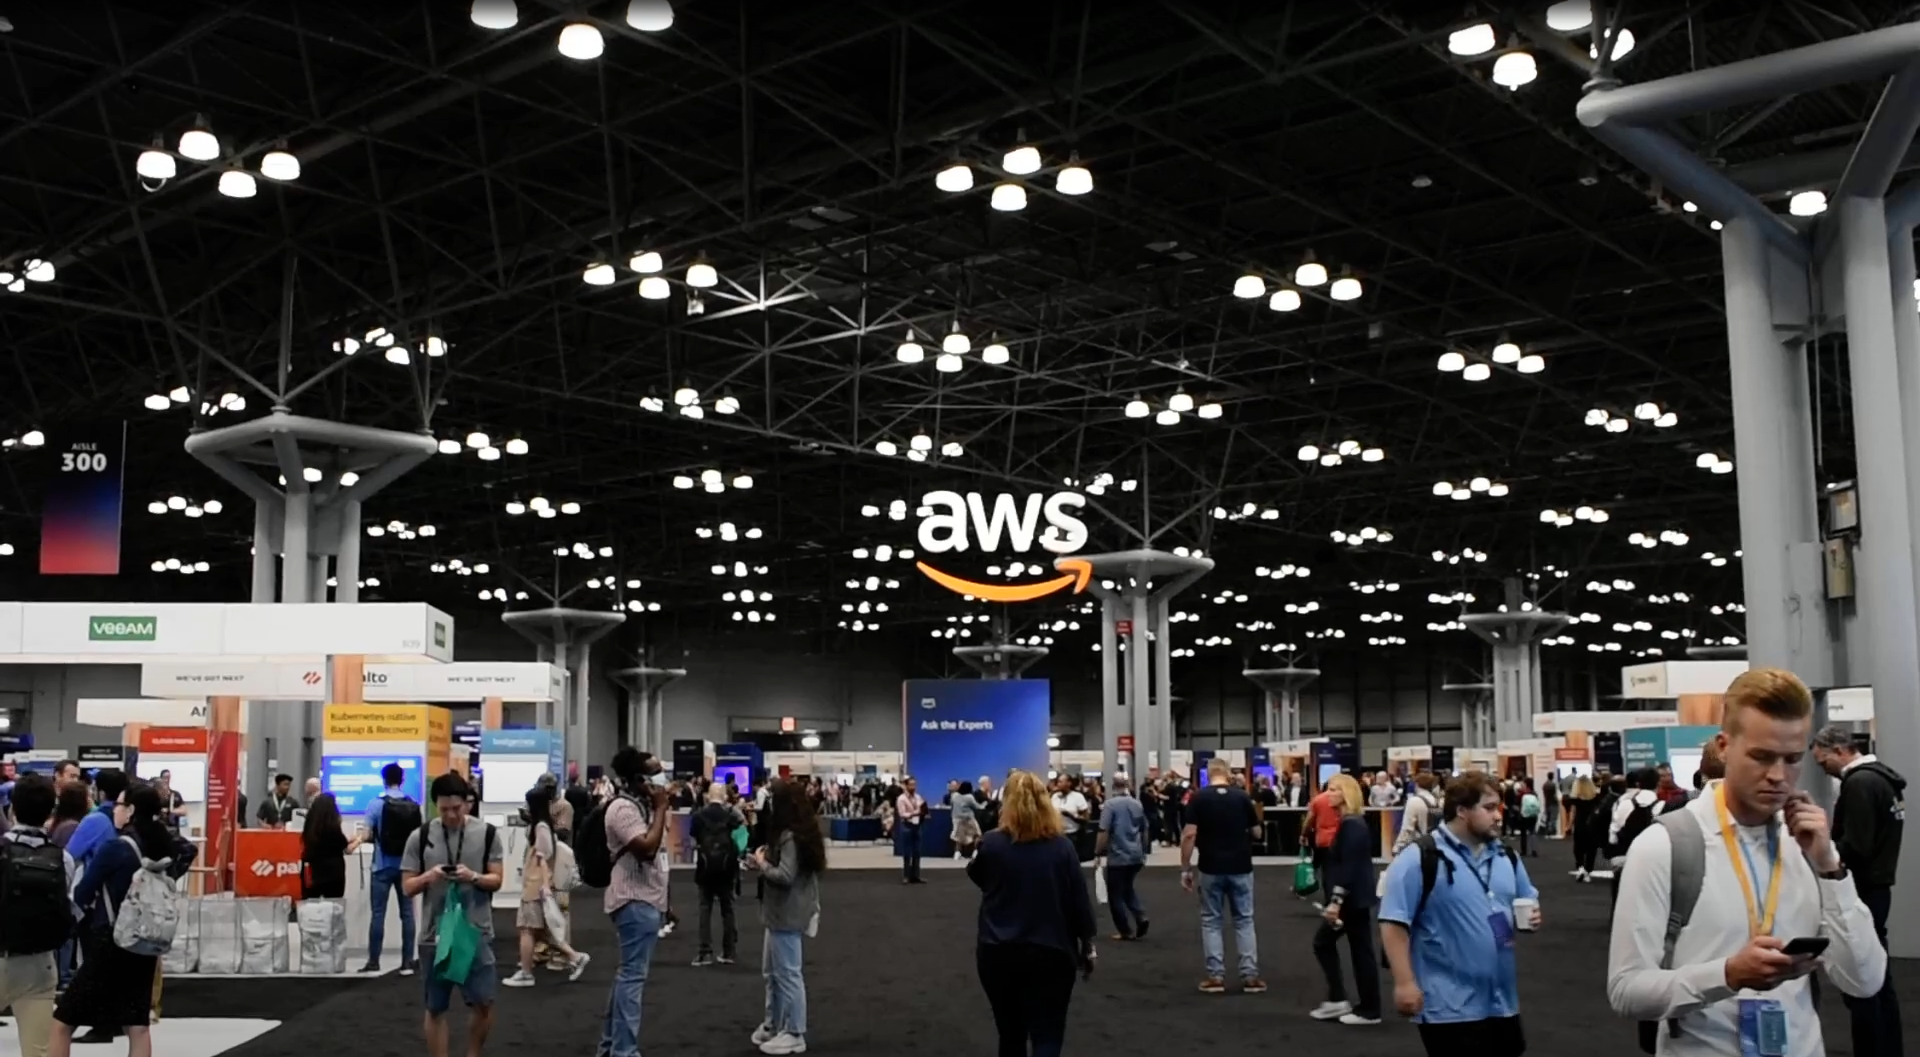 The expo floor at AWS New York